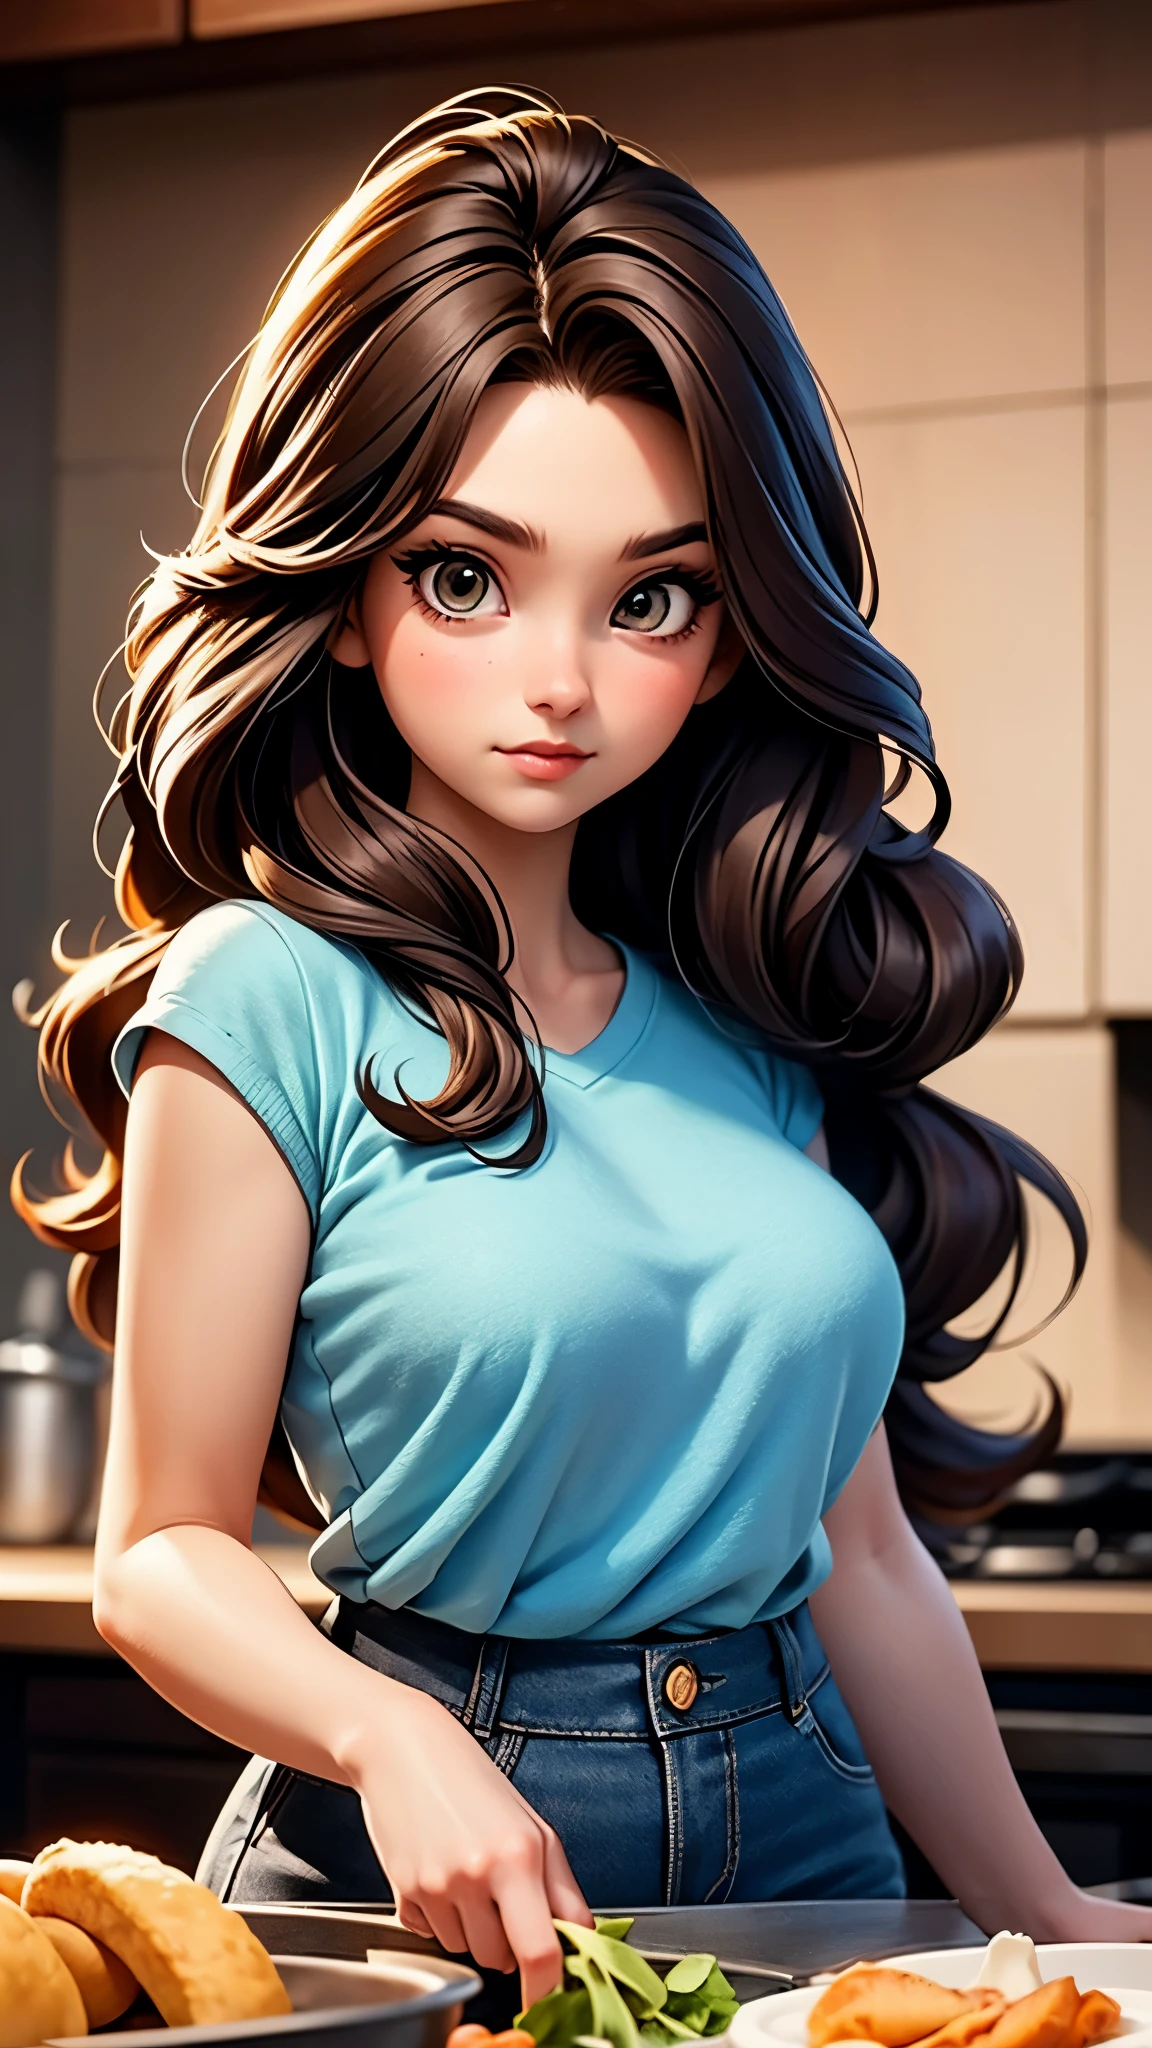 25-yo girl with long brown hair and blue shirt posing in kitchen, fluffy hair, flowing massive hair, cute detailed digital art, deviantart artstation cgscosiety, in the style of ross tran, beautiful digital artwork. UHD, best quality, 16k, anatomically correct, textured skin, super detail